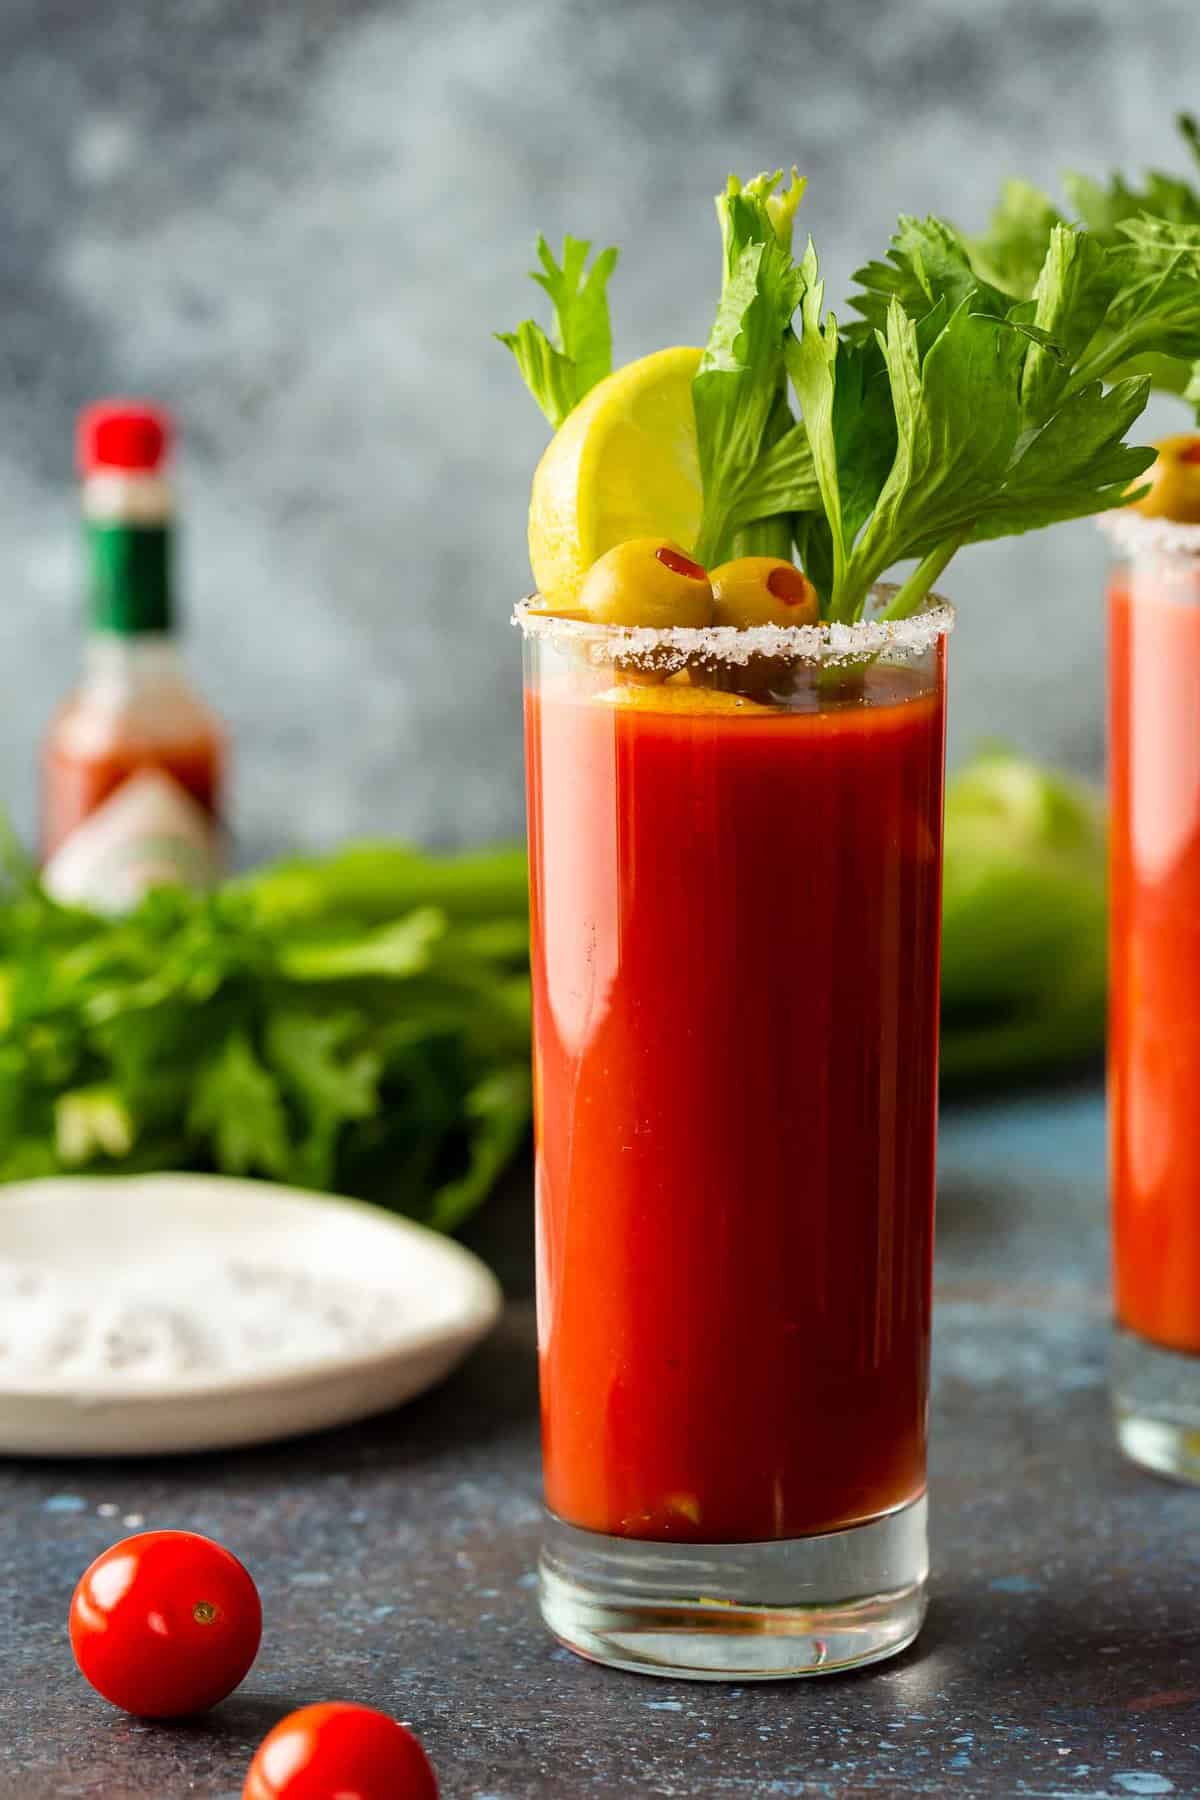 Bloody Mary (Stovetop Recipe) - How to Make a Bloody Mary - (VIDEO)